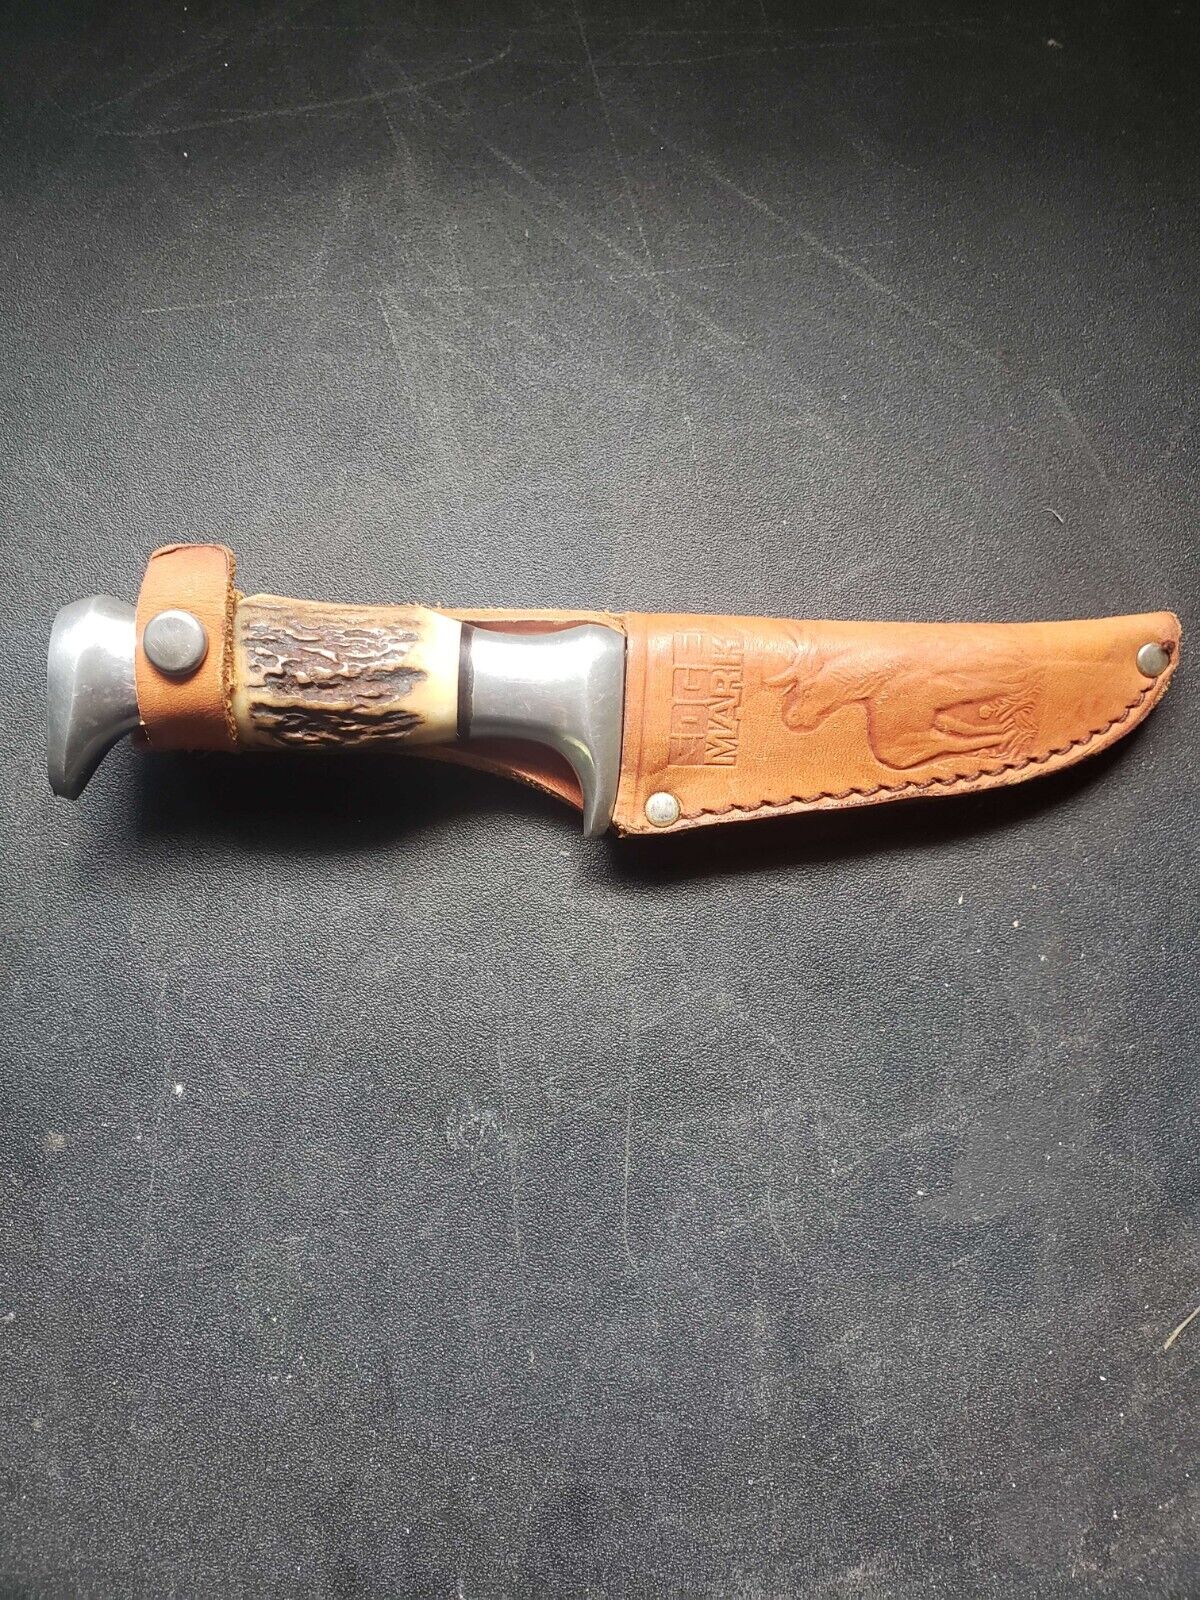 Edge Brand Solingen Germany Stag Bird & Trout Knife